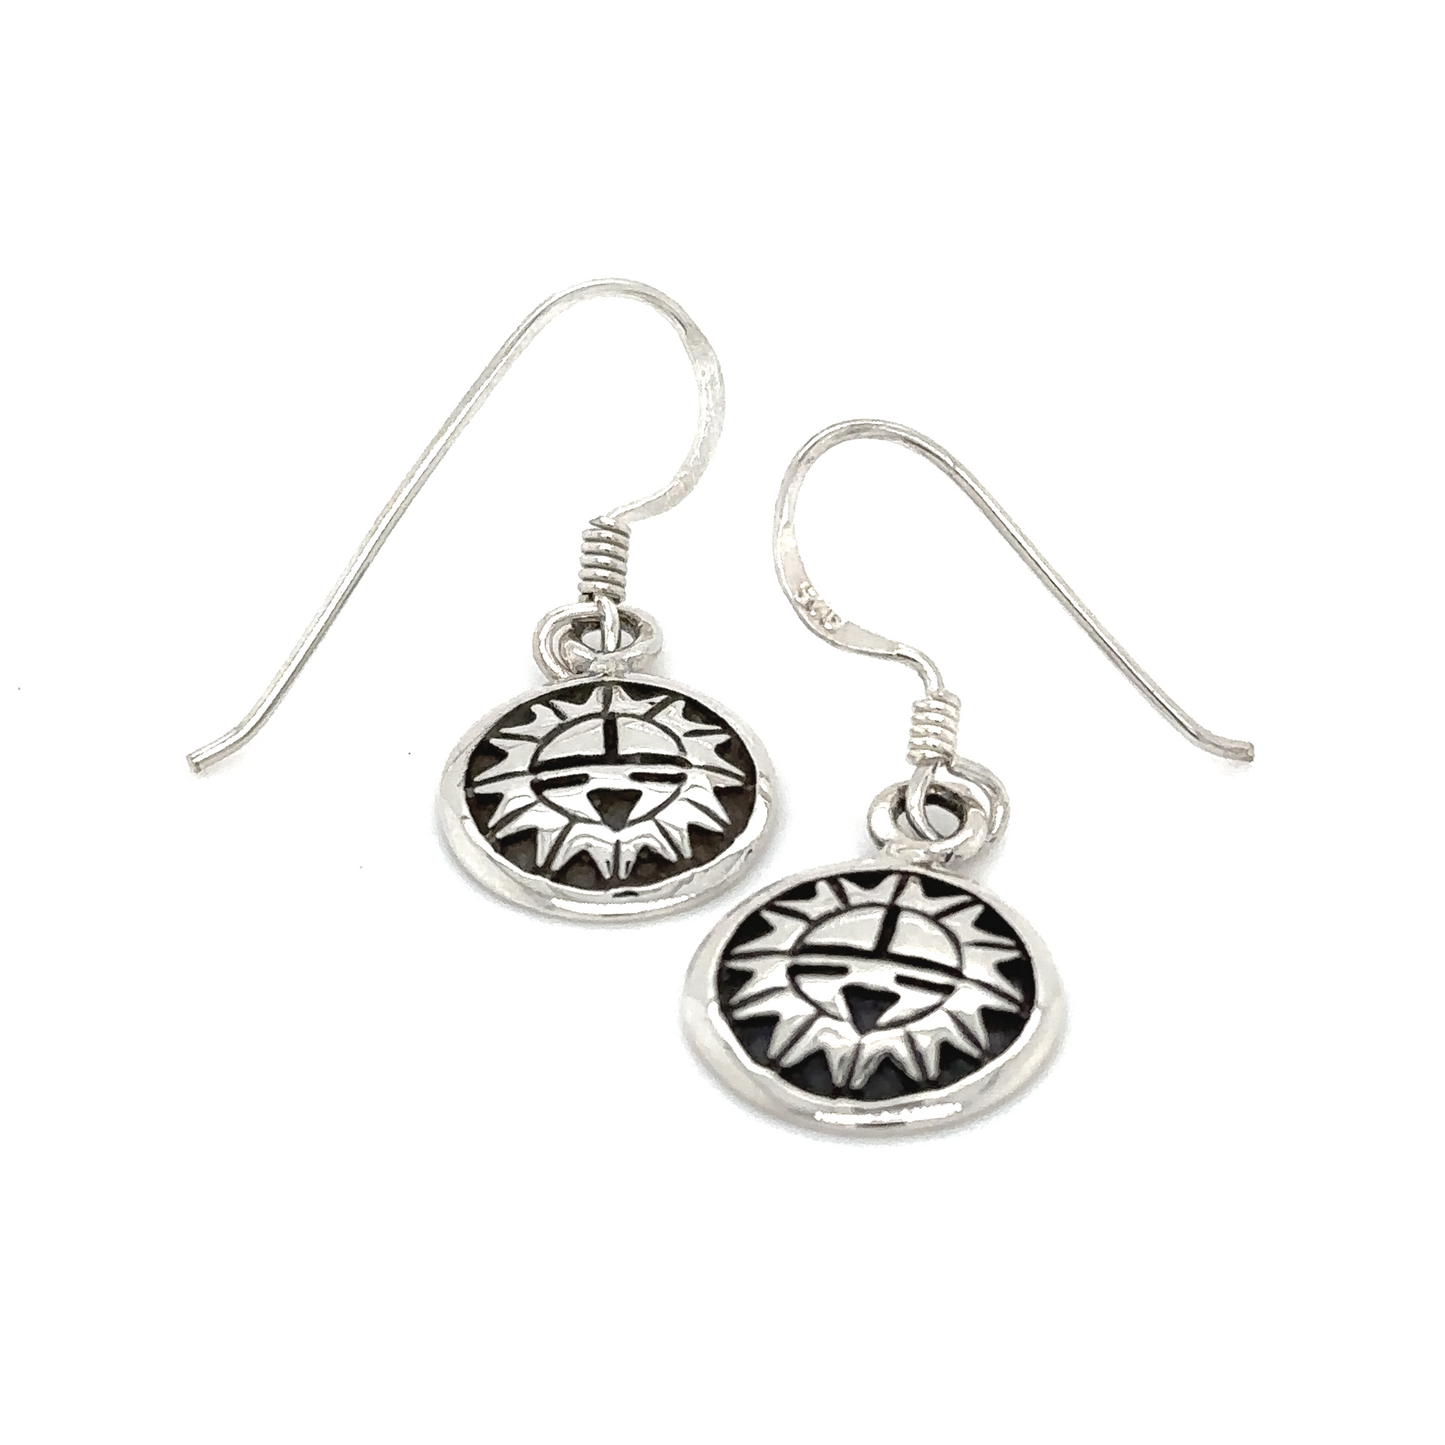 A pair of small Tribal Sun Earrings made by Super Silver that will brighten up your day.